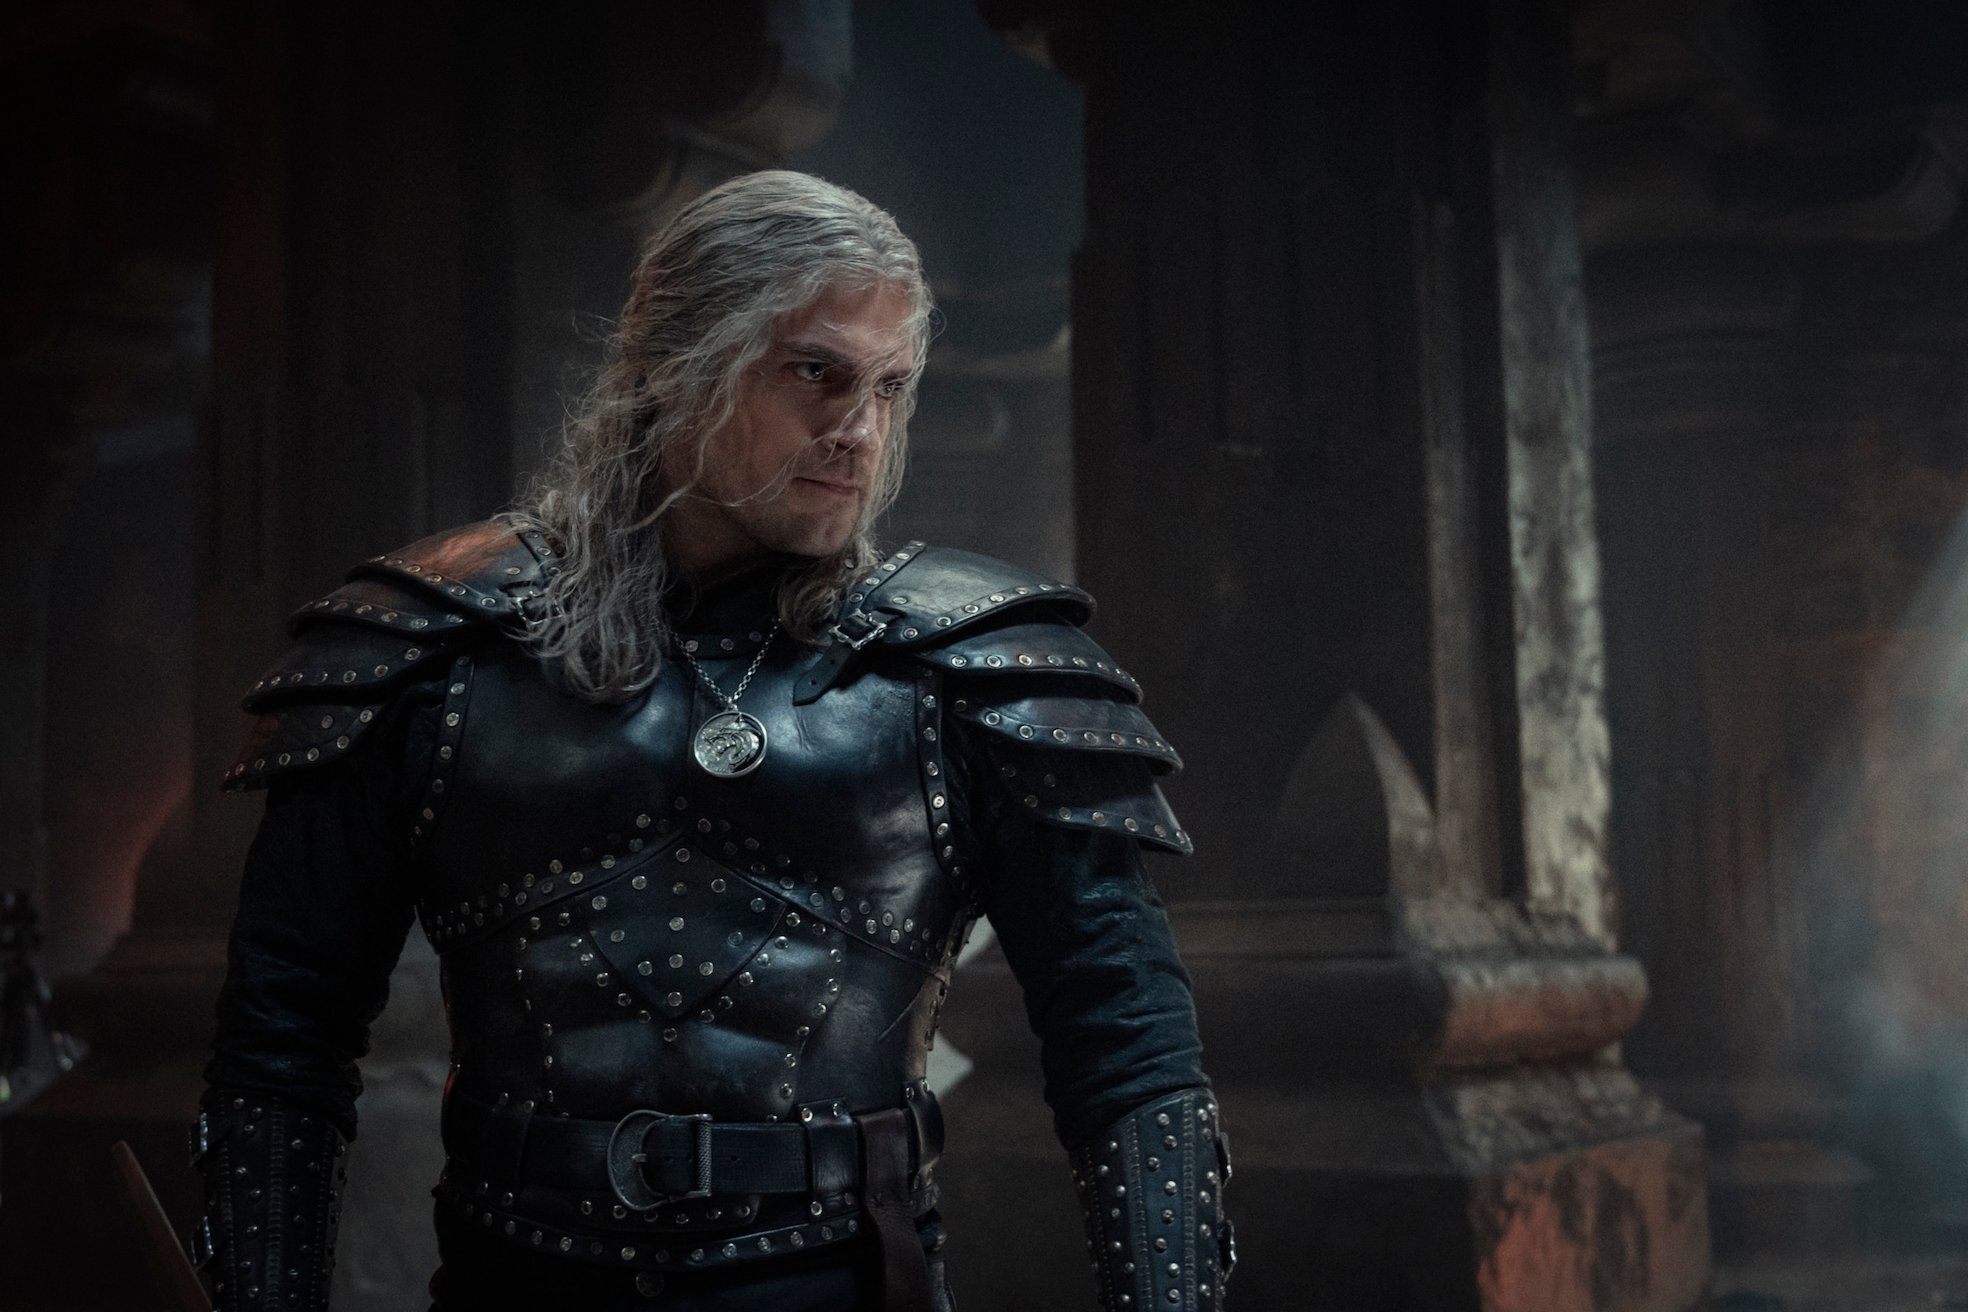 Henry Cavill as Geralt of Rivia in season 2 of The Witcher